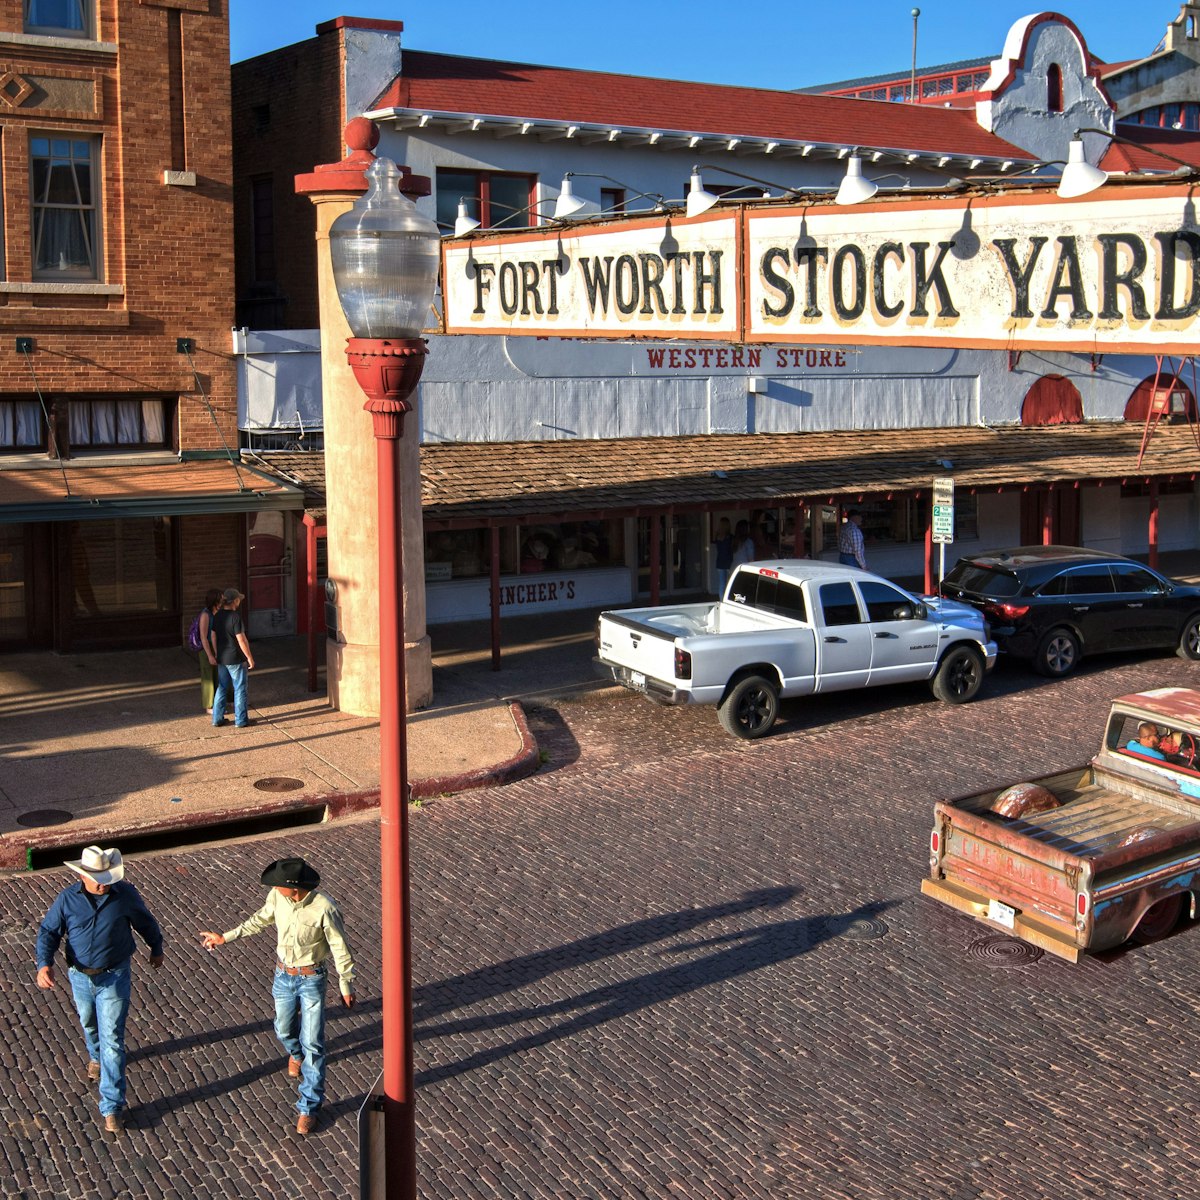 Rodeo cowboys and a low rider truck on Exchange Street in the Fort Worth Stockyards Historic District.  The district is listed on the National Register of Historic Places.